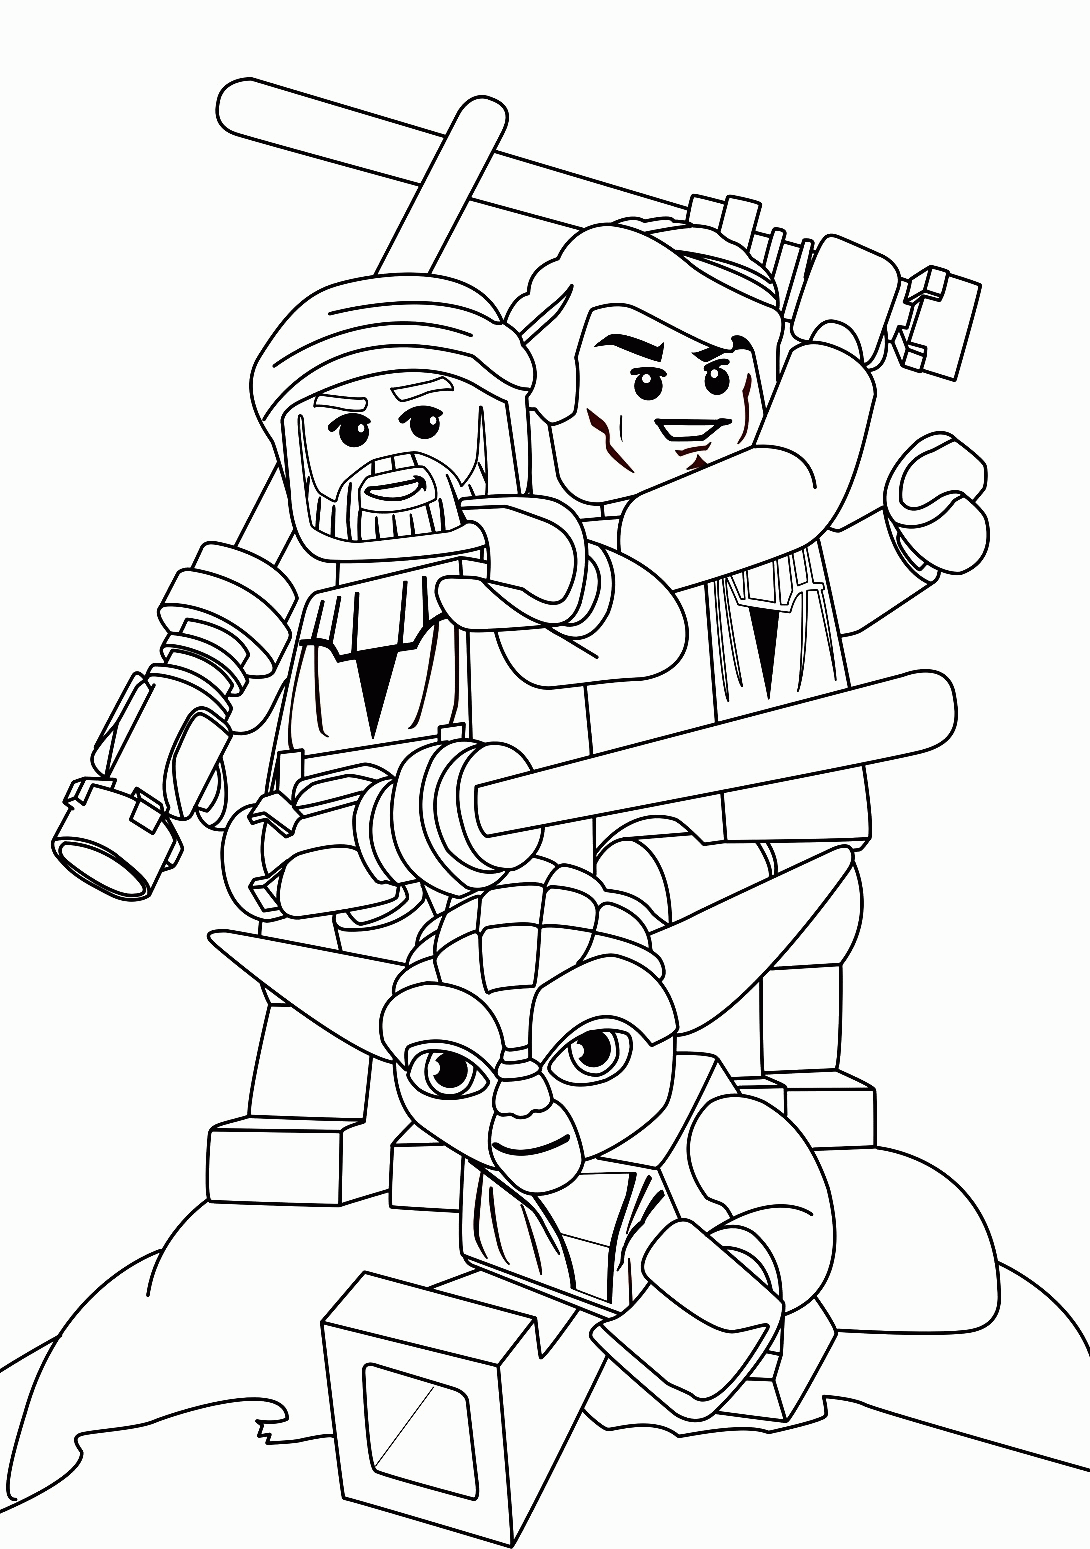 Lego Lightsabers Coloring Pages